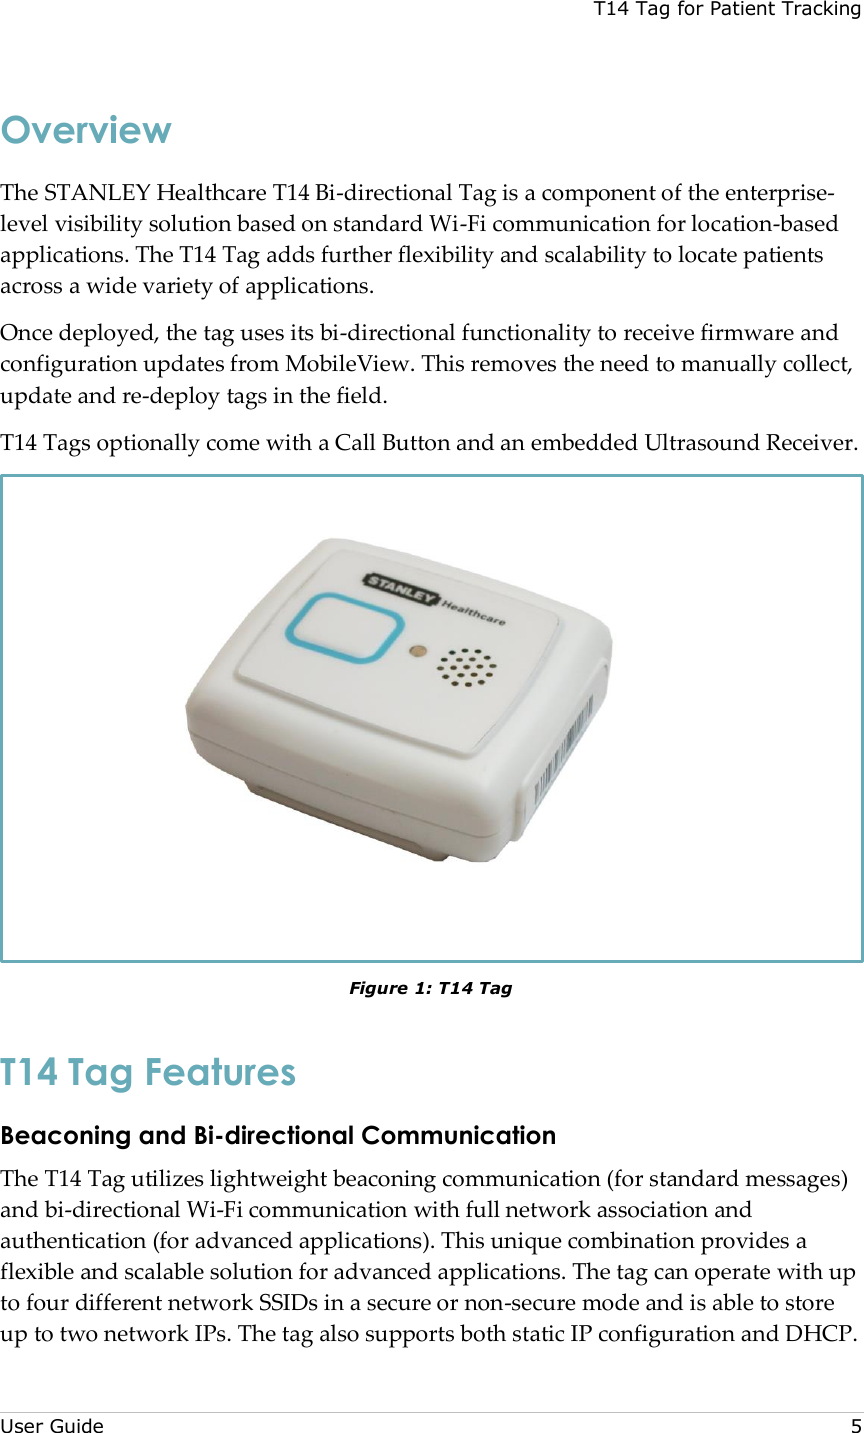 T14 Tag for Patient Tracking  User Guide     5 Overview The STANLEY Healthcare T14 Bi-directional Tag is a component of the enterprise-level visibility solution based on standard Wi-Fi communication for location-based applications. The T14 Tag adds further flexibility and scalability to locate patients across a wide variety of applications. Once deployed, the tag uses its bi-directional functionality to receive firmware and configuration updates from MobileView. This removes the need to manually collect, update and re-deploy tags in the field. T14 Tags optionally come with a Call Button and an embedded Ultrasound Receiver.  Figure 1: T14 Tag T14 Tag Features Beaconing and Bi-directional Communication  The T14 Tag utilizes lightweight beaconing communication (for standard messages) and bi-directional Wi-Fi communication with full network association and authentication (for advanced applications). This unique combination provides a flexible and scalable solution for advanced applications. The tag can operate with up to four different network SSIDs in a secure or non-secure mode and is able to store up to two network IPs. The tag also supports both static IP configuration and DHCP. 